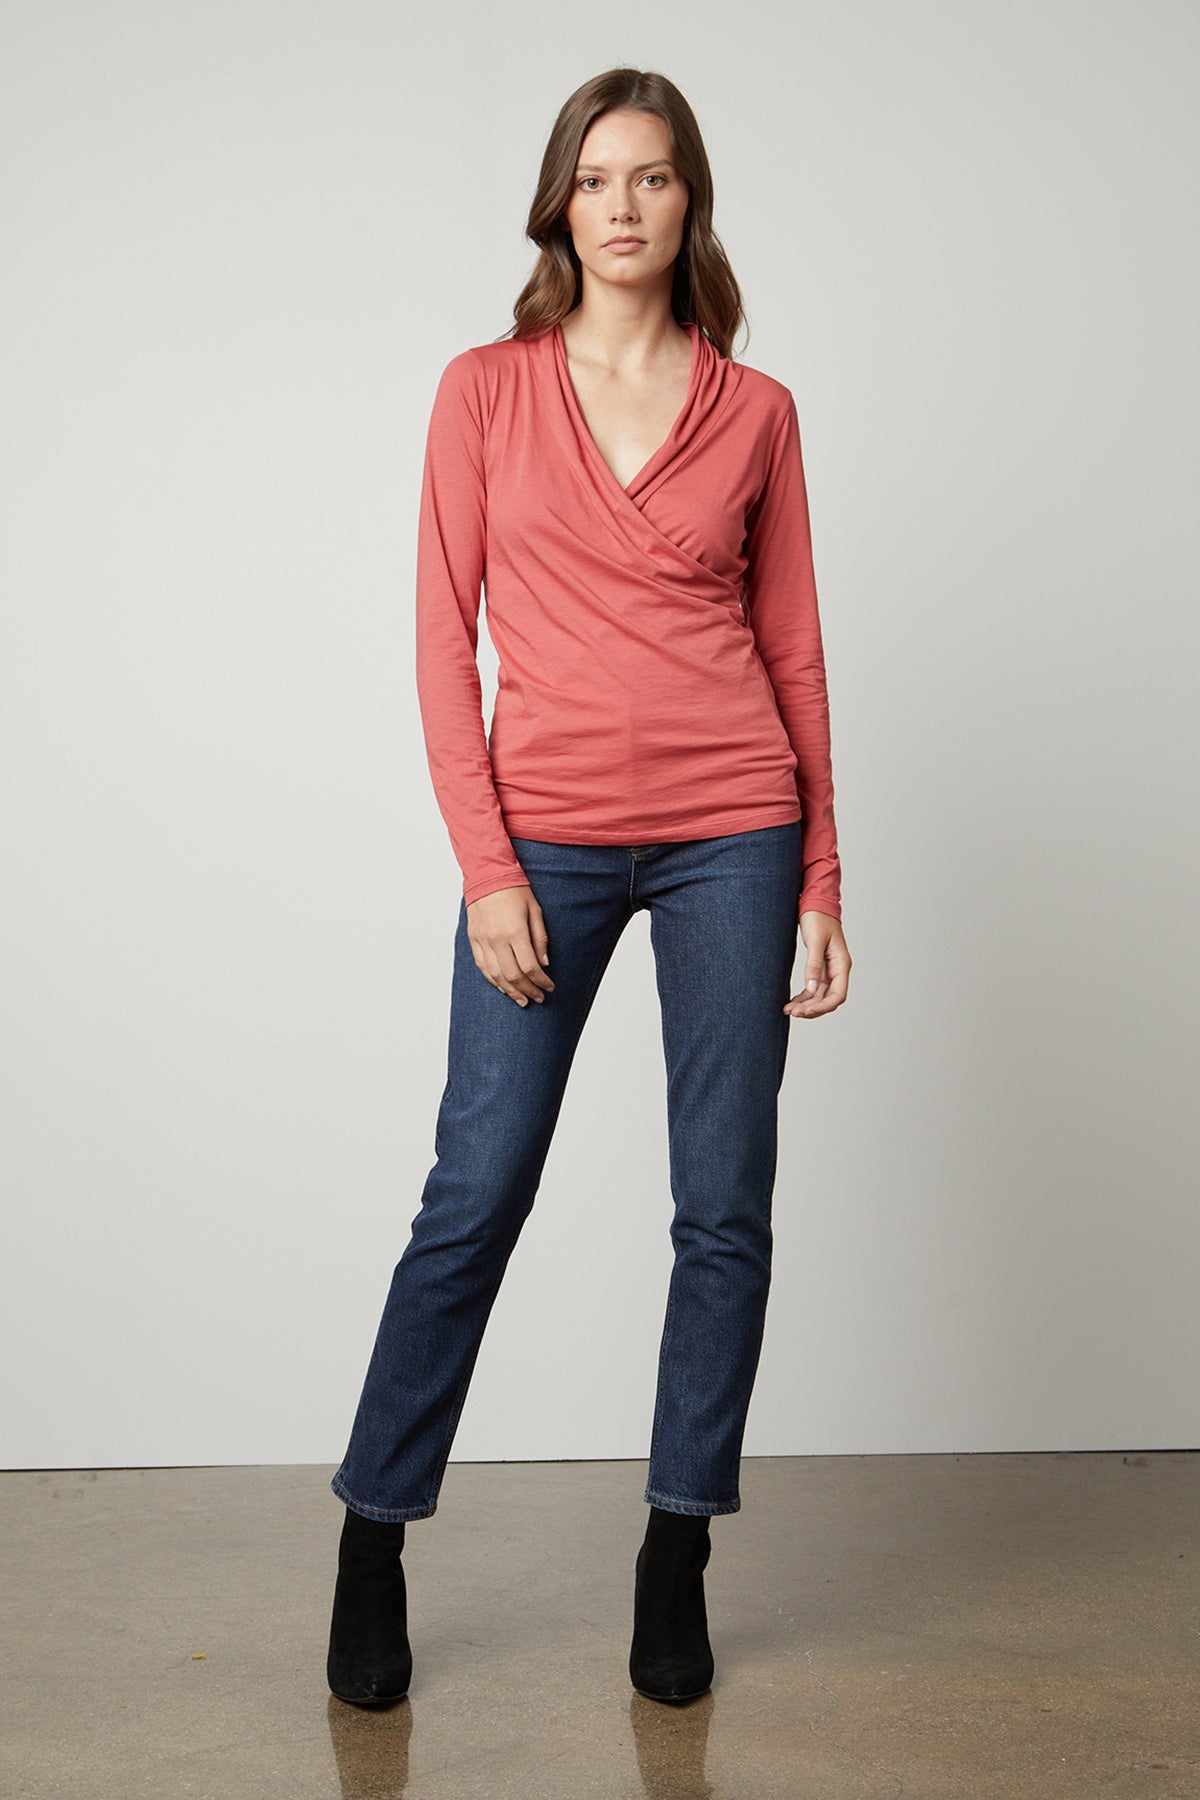 The model is wearing a Velvet by Graham & Spencer MERI WRAP FRONT FITTED TOP and jeans.-35567564390593